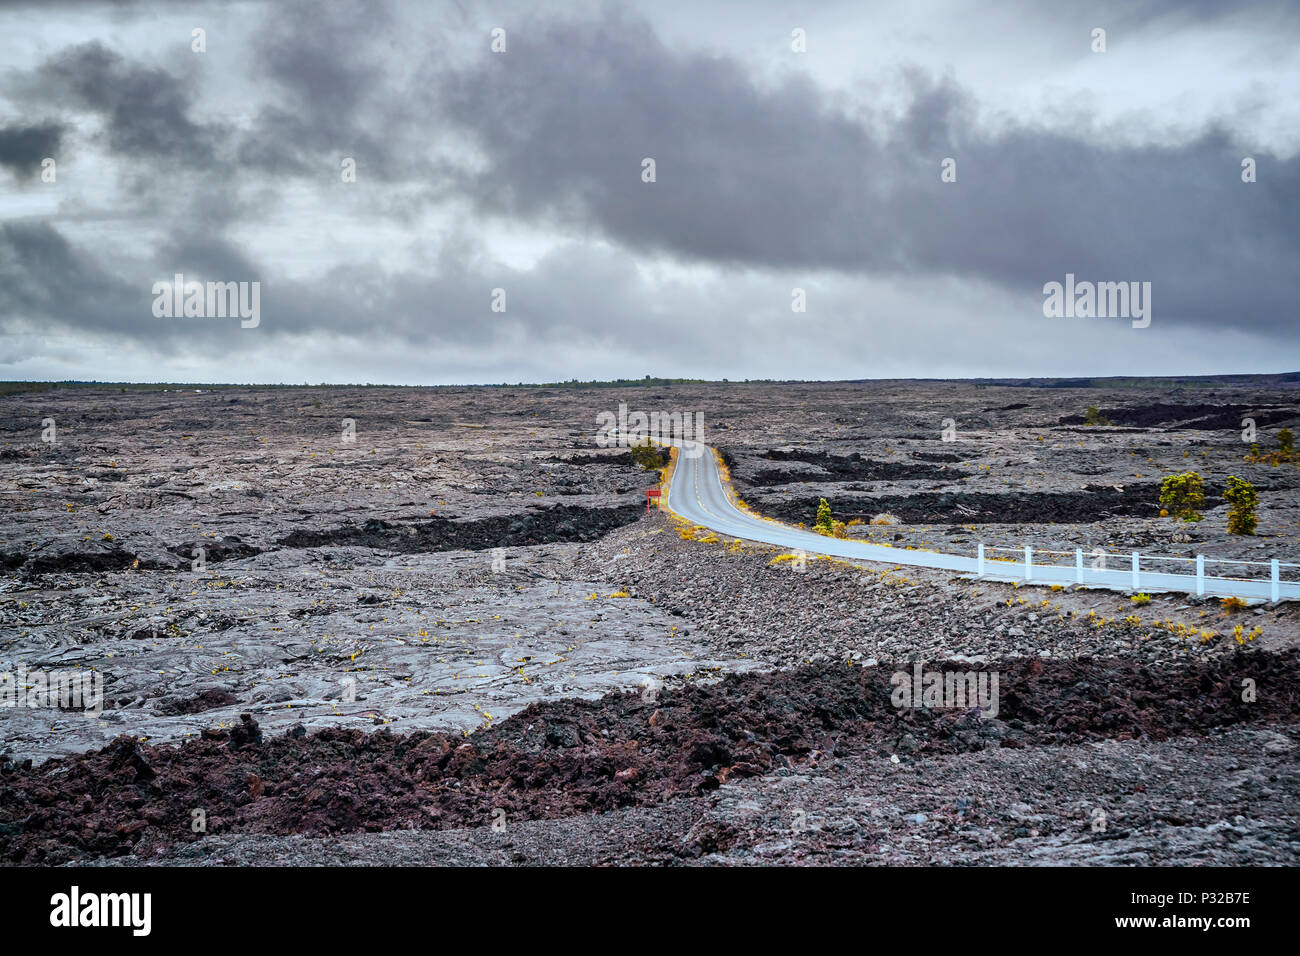 Volcanic landscape when driving Chain of craters road in Big Island of Hawaii Stock Photo